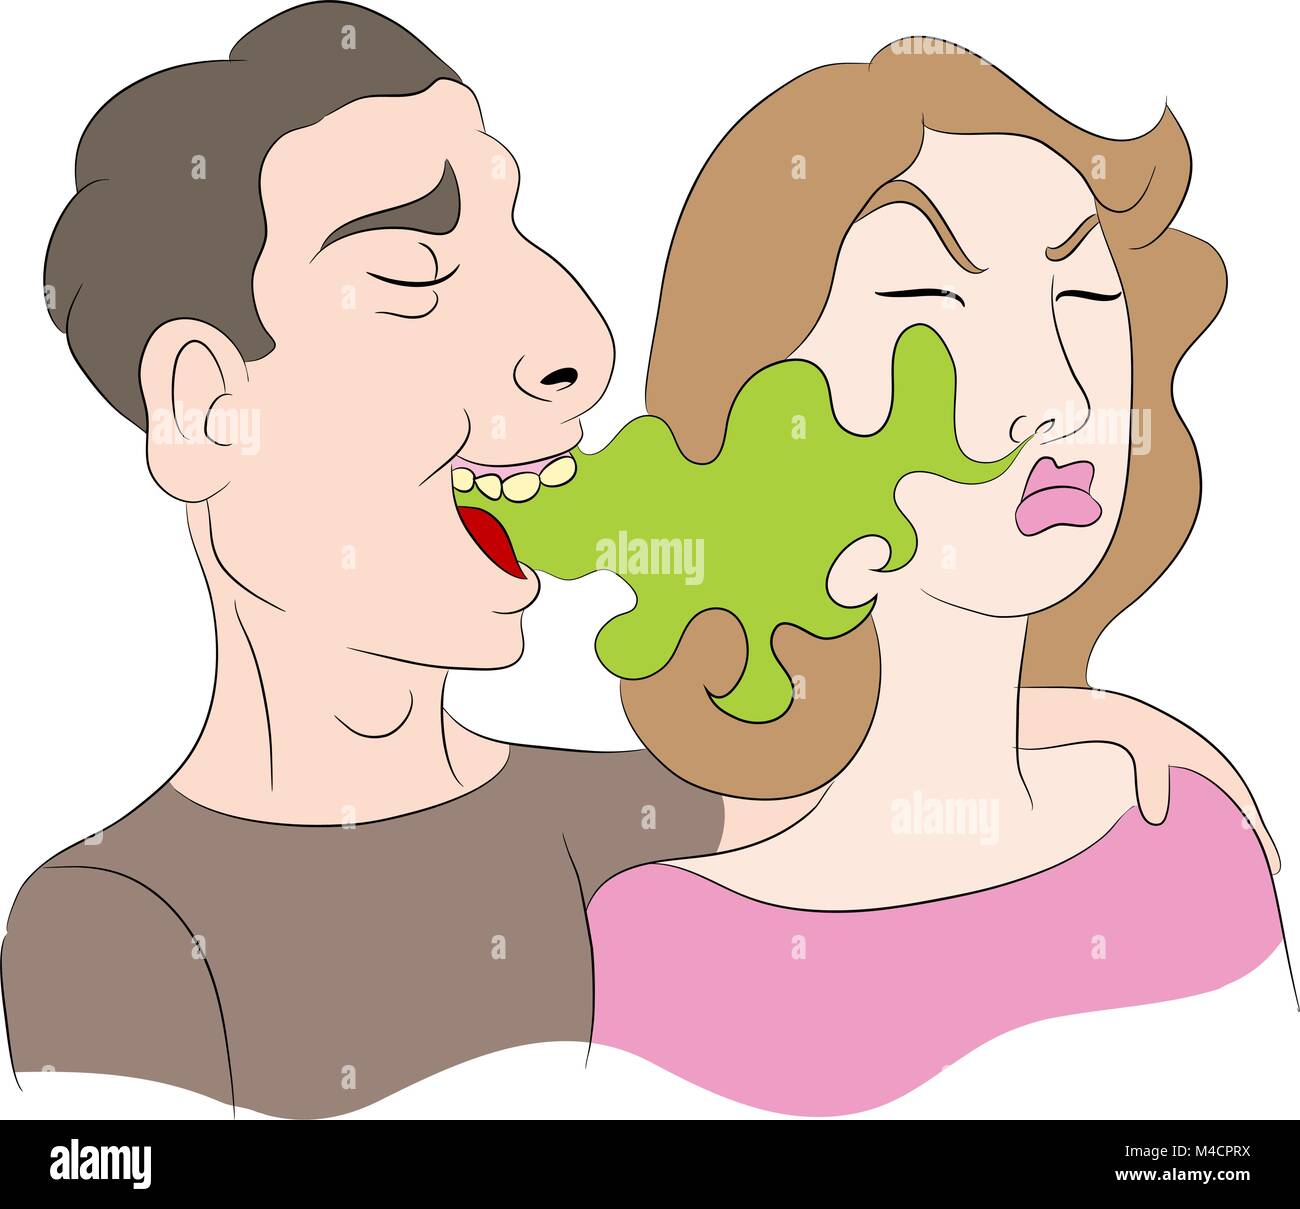 An image of a cartoon of a woman noticing a man has bad breath. Stock Vector